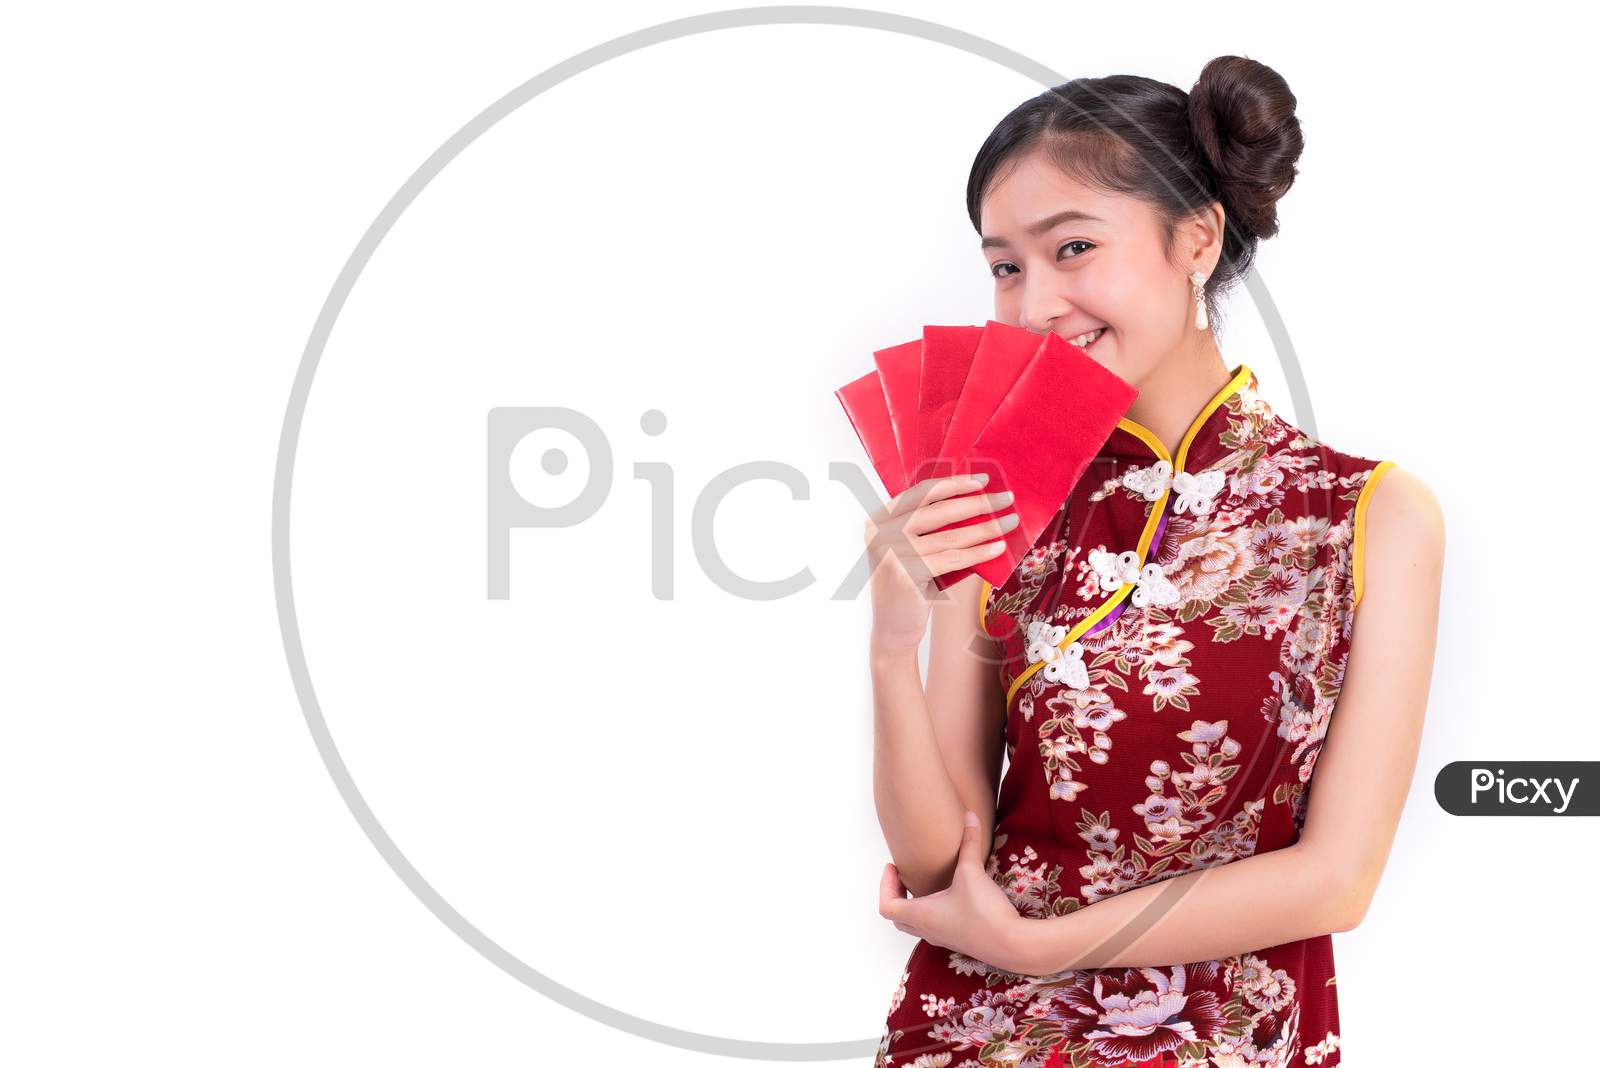 Young Asian Beauty Woman Wearing Cheongsam And Holding Packet Of Moneys Gesture In Chinese New Year Festival Event On Isolated White Background. Holiday And Lifestyle Concept. Qipao Dress Wearing